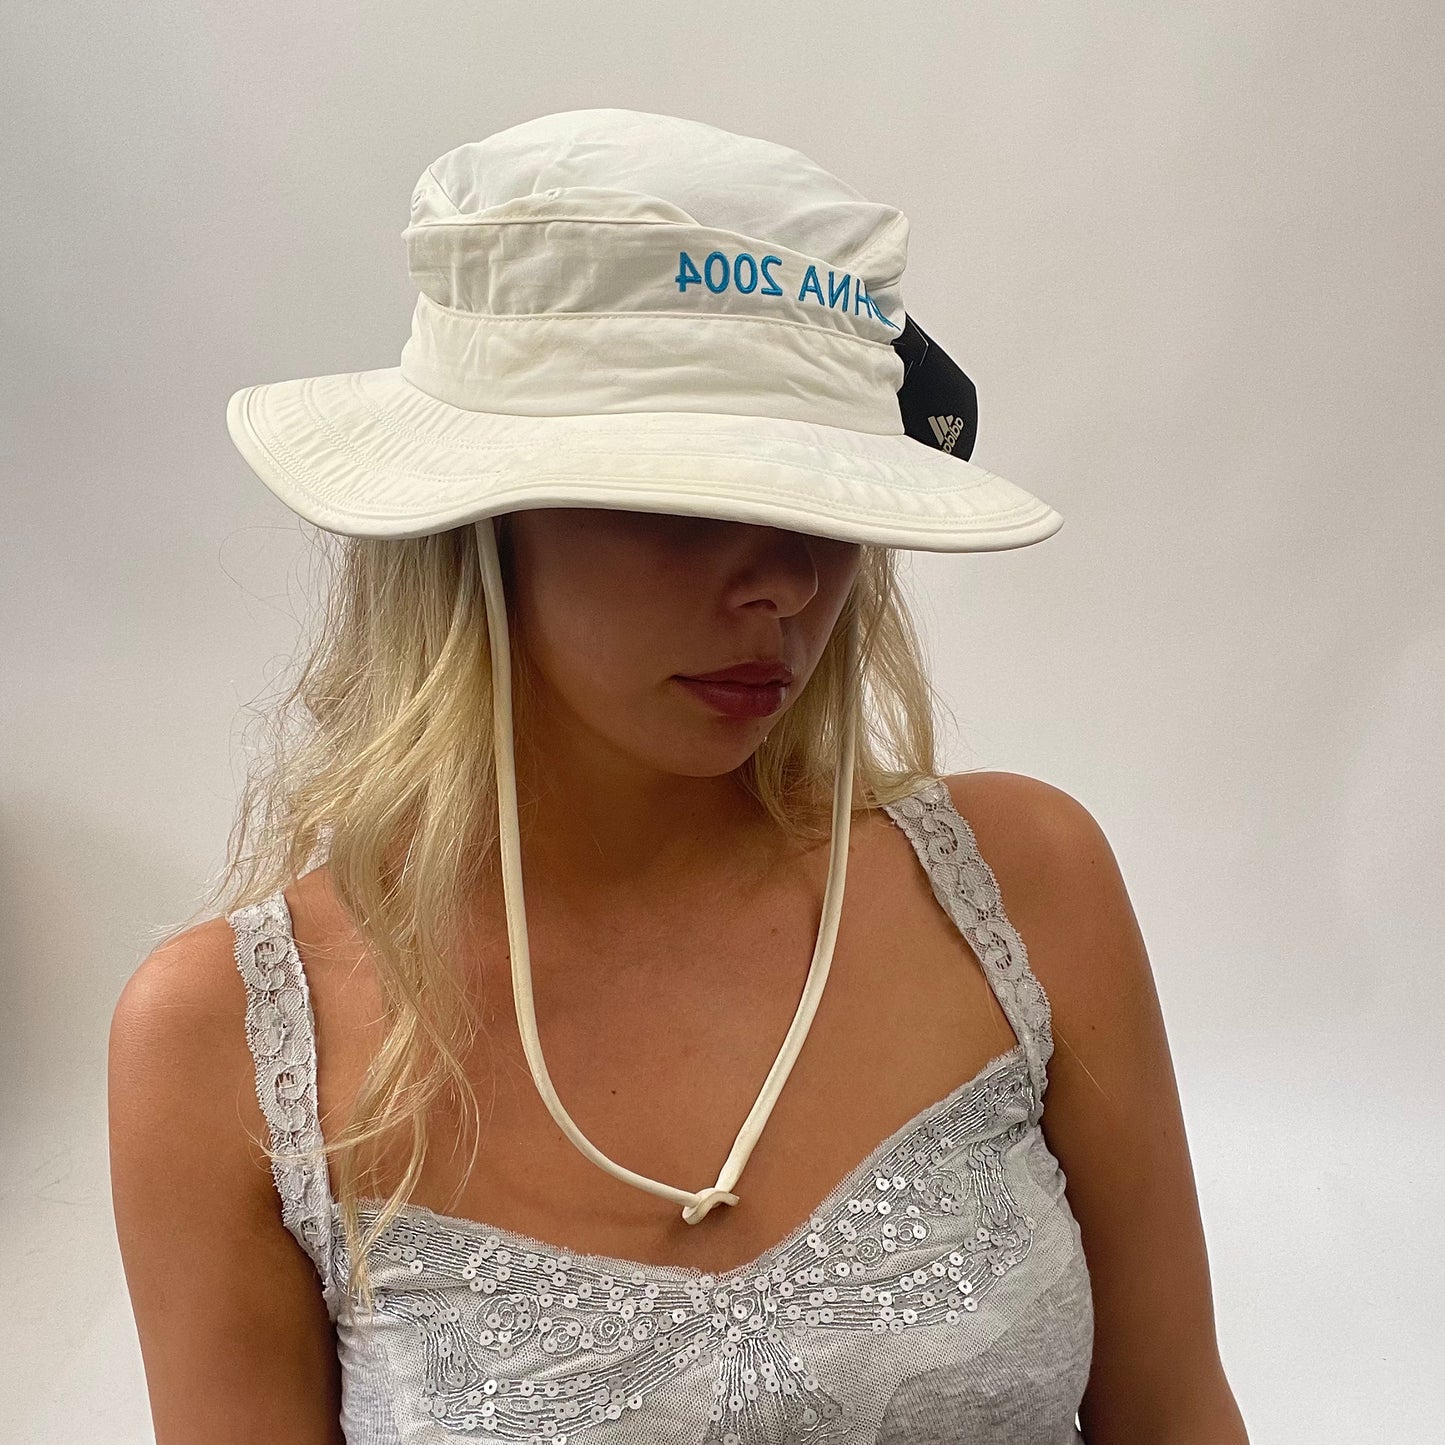 BOAT PARTY DROP | cream adidas sun hat with “aohna 2004” graphic